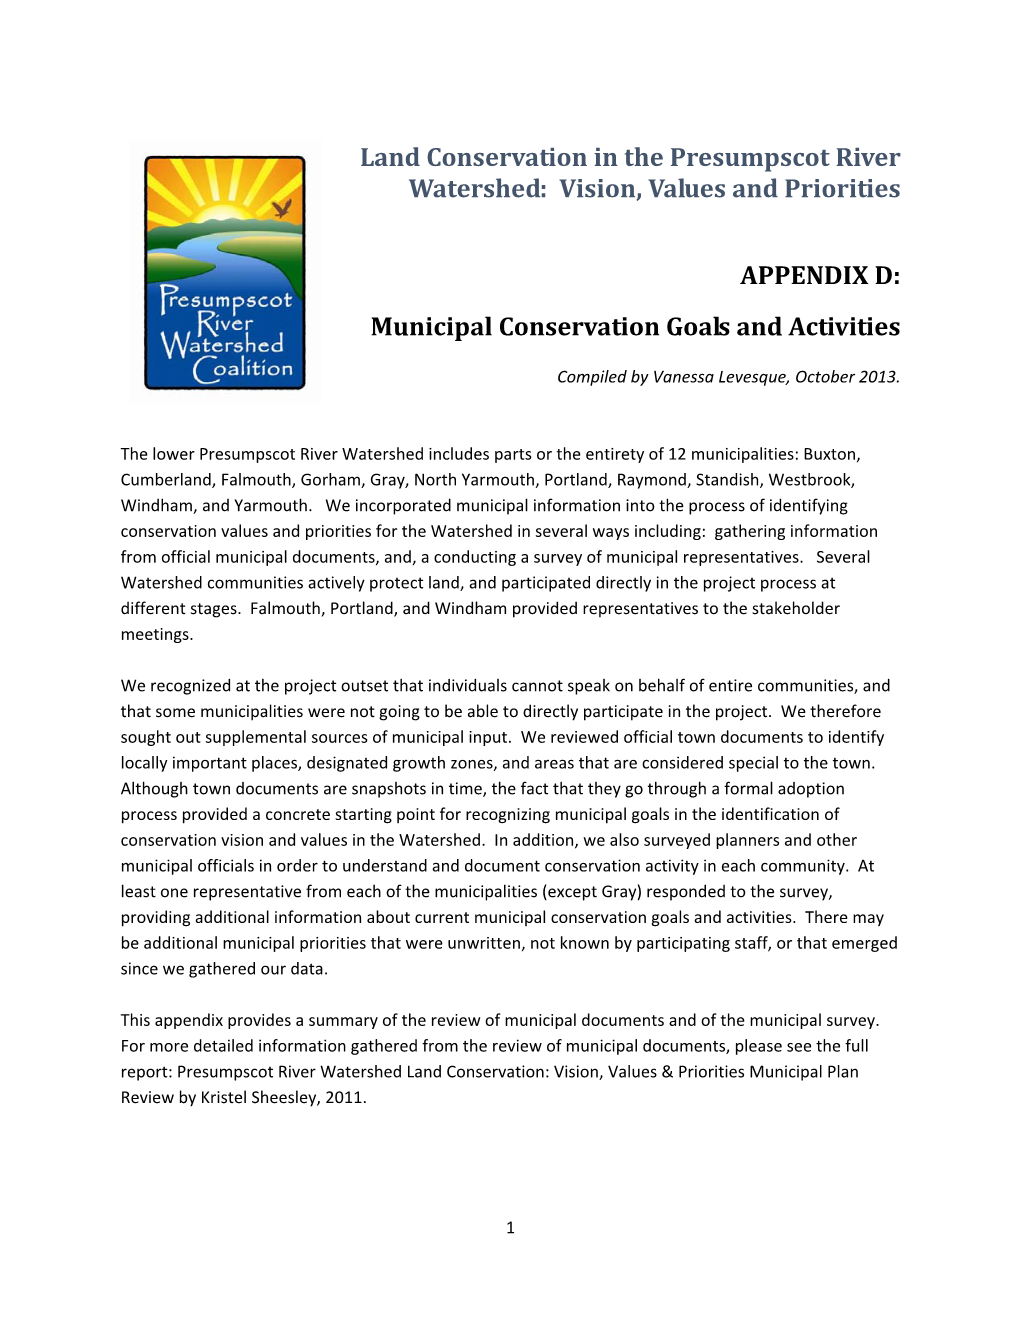 Land Conservation in the Presumpscot River Watershed: Vision, Values and Priorities